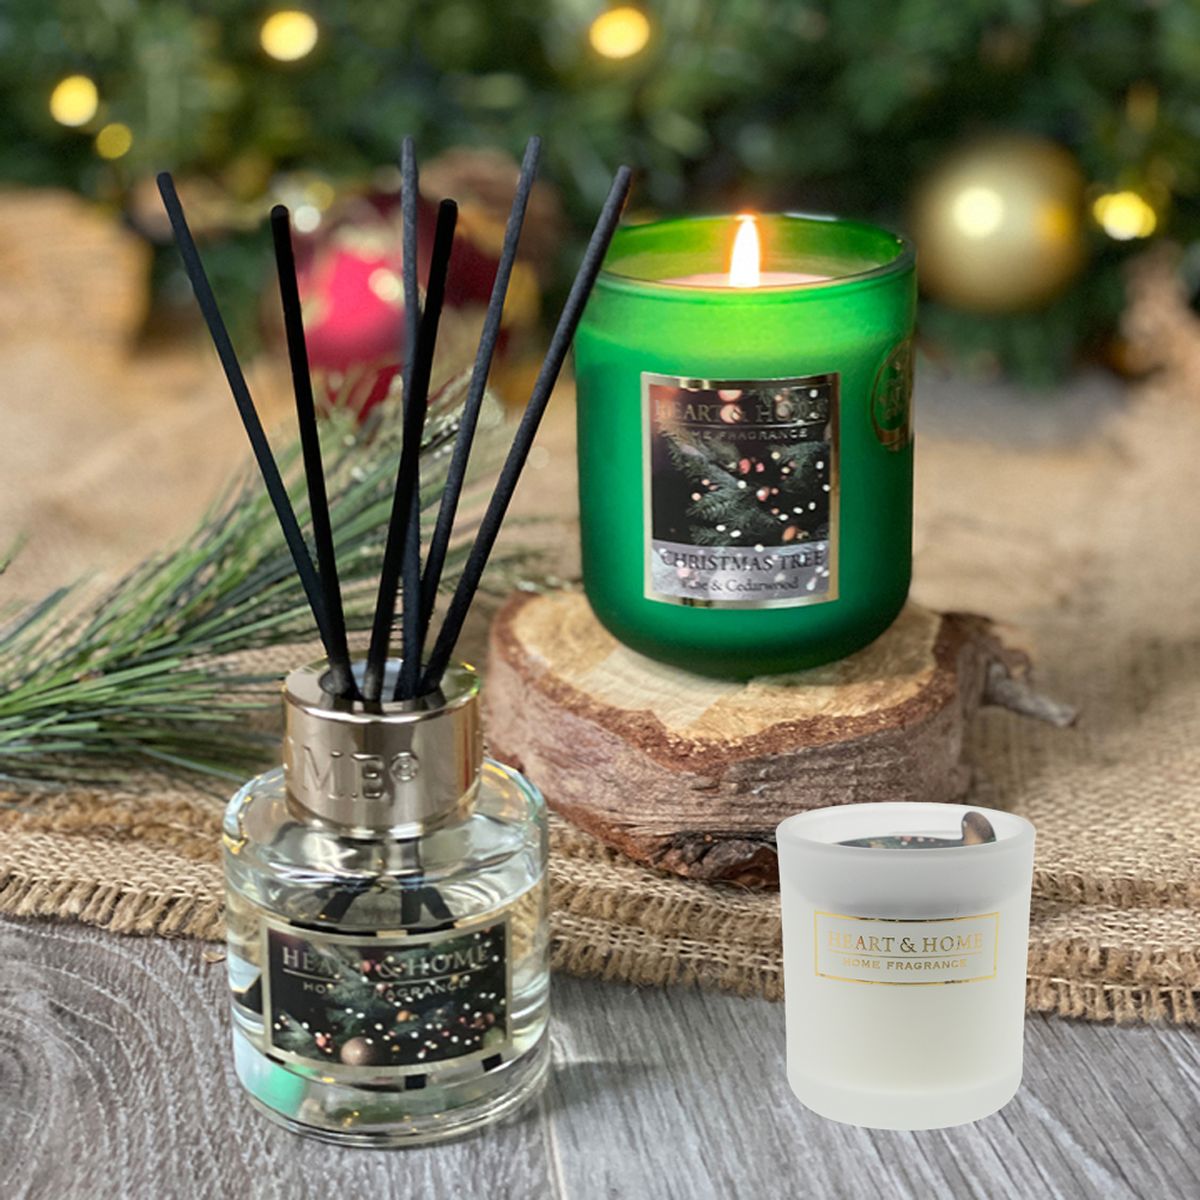 Small Heart and Home Soy Wax Candle - Christmas Tree